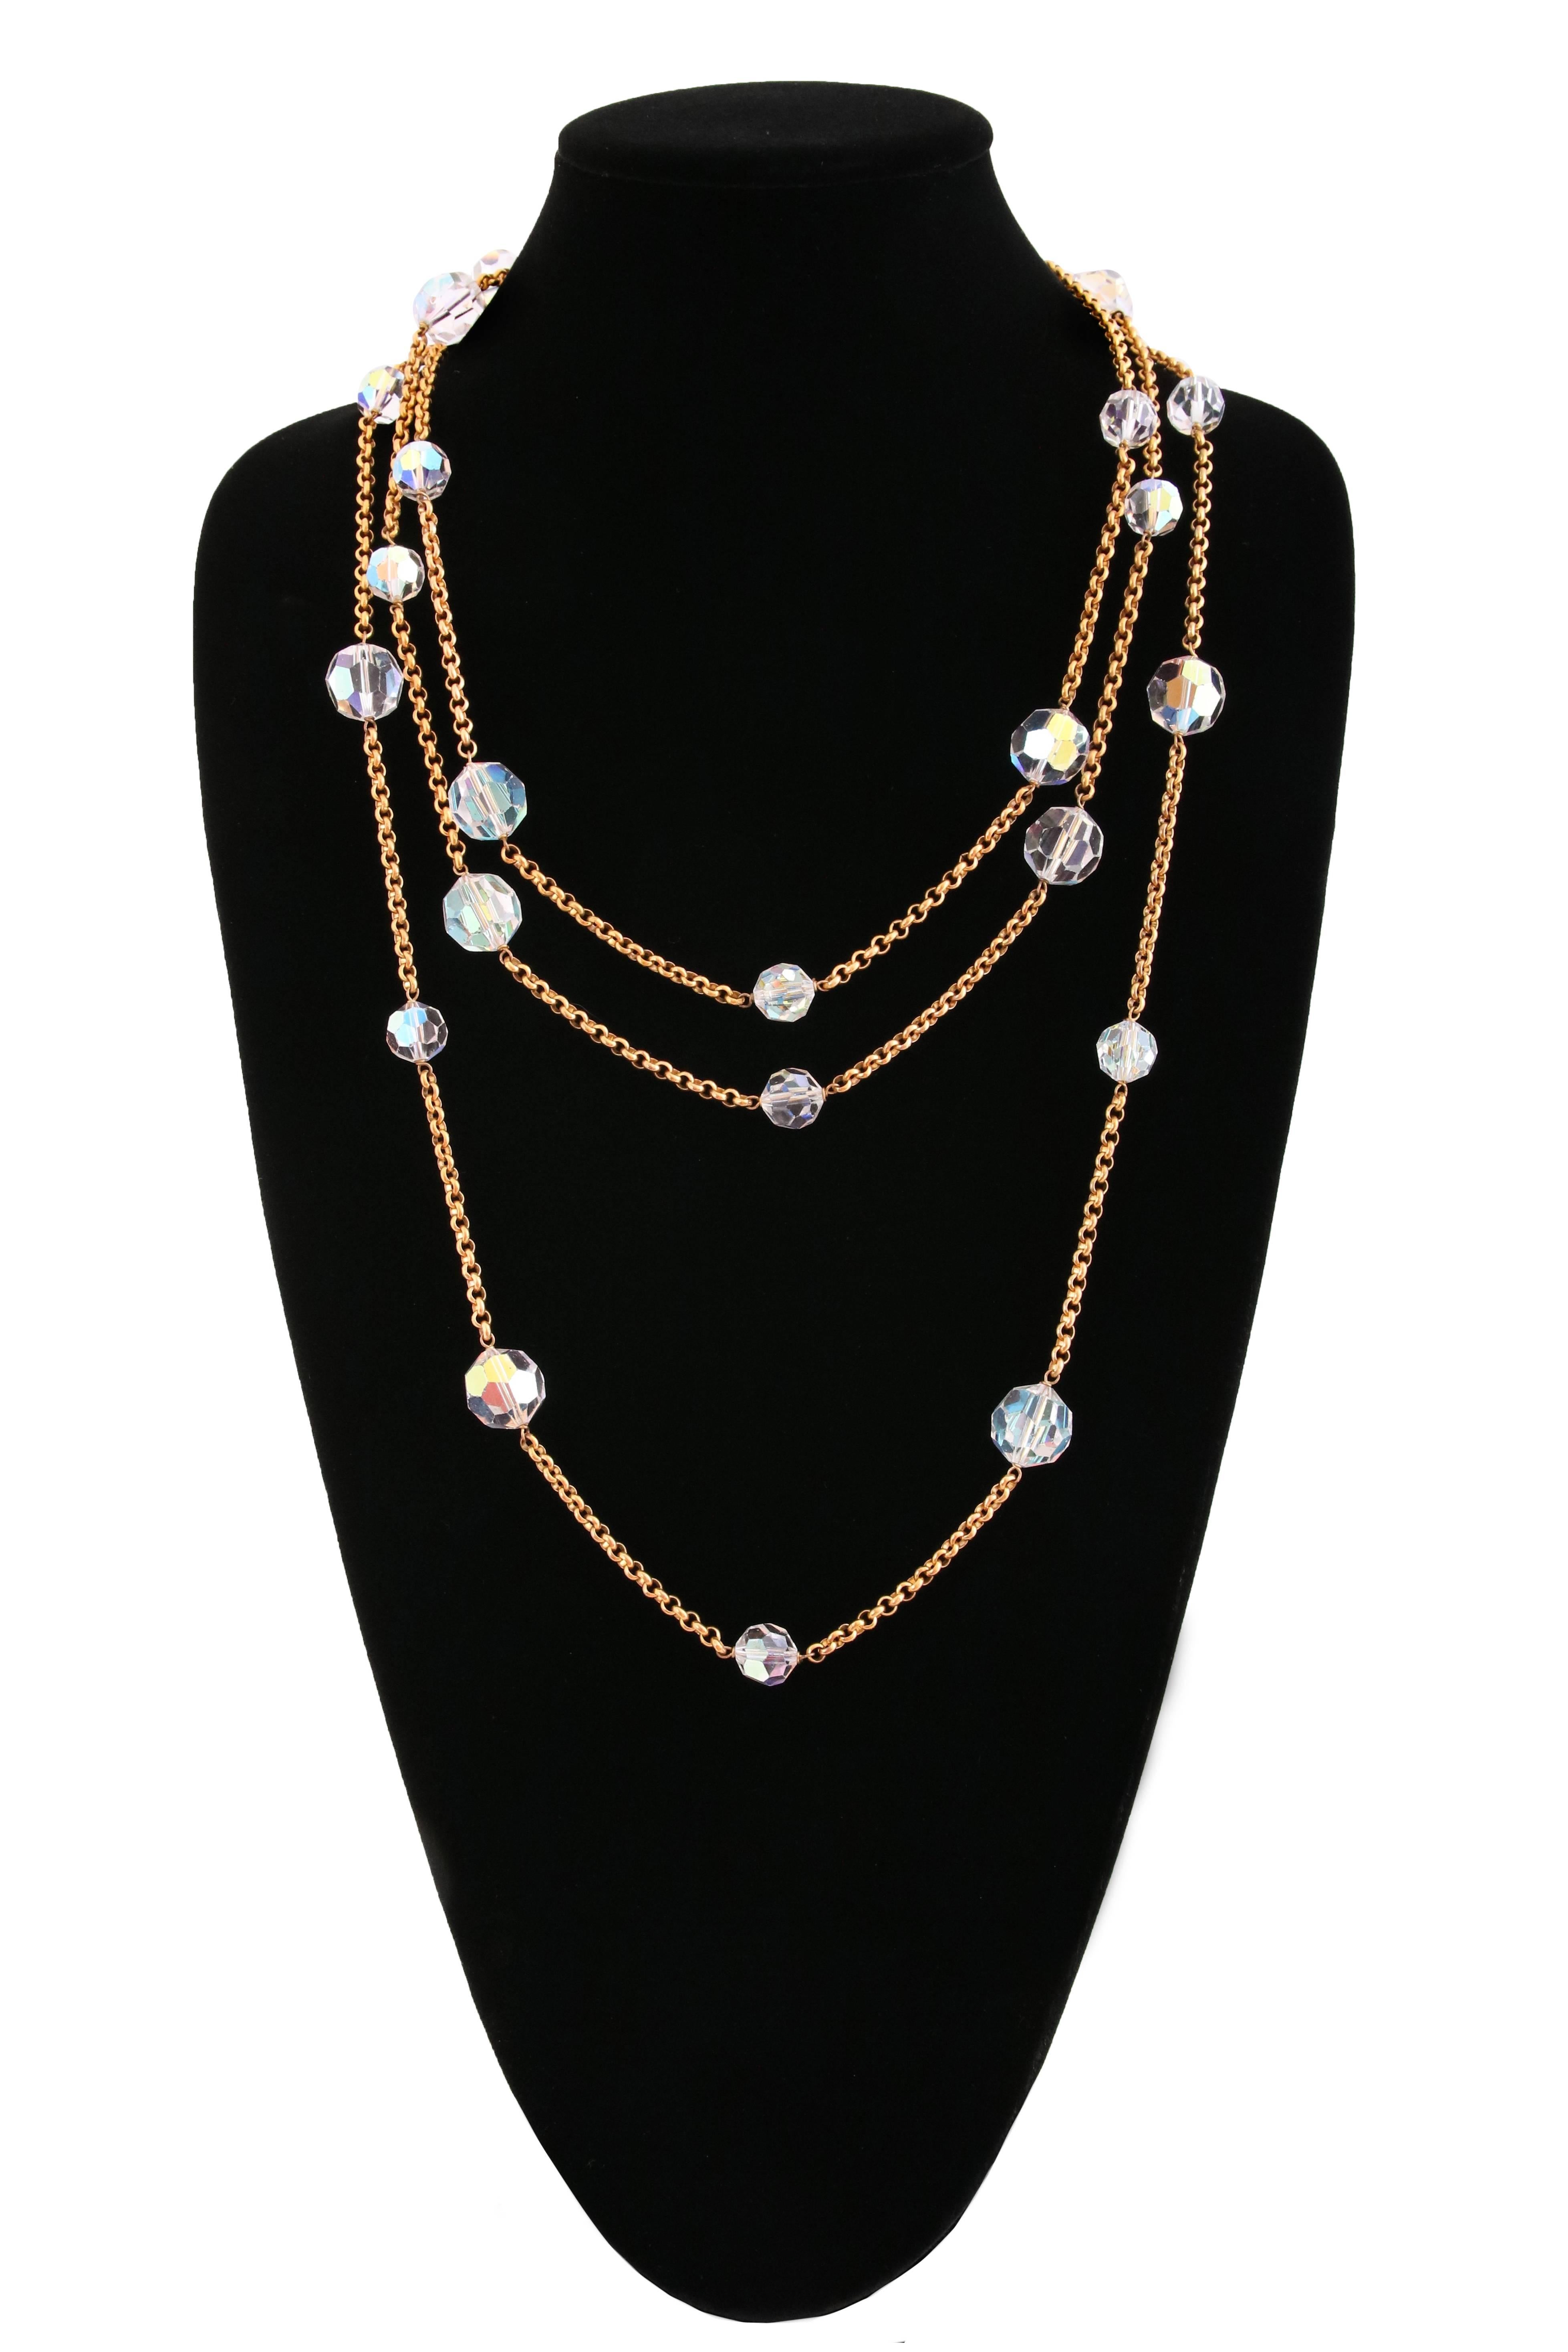 Chanel long sautoir necklace made of gold tone chain and staggered iridescent aurora borealis faceted crystal beads in two different sizes. Stamped Chanel - collection 28, circa 1993. In excellent condition.
MEASUREMENTS:
Length - 39